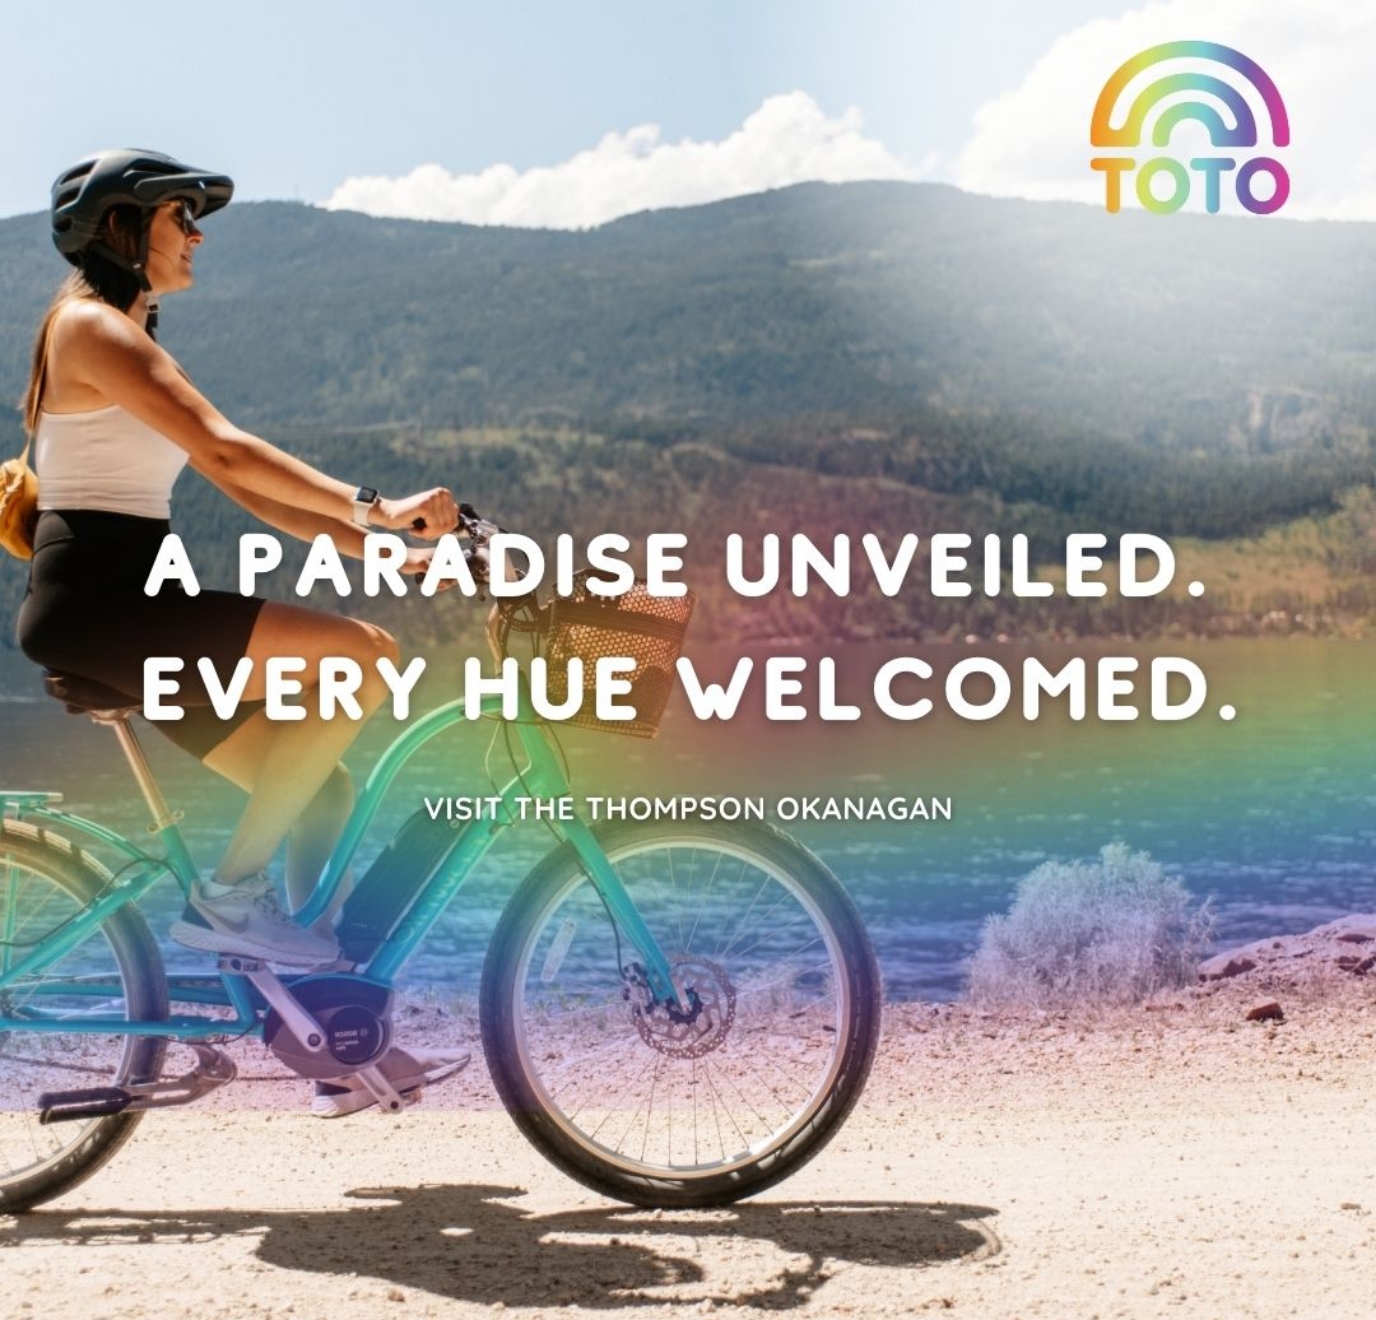 TOTO social media marketing Every Hue Welcome campaign girl on bike